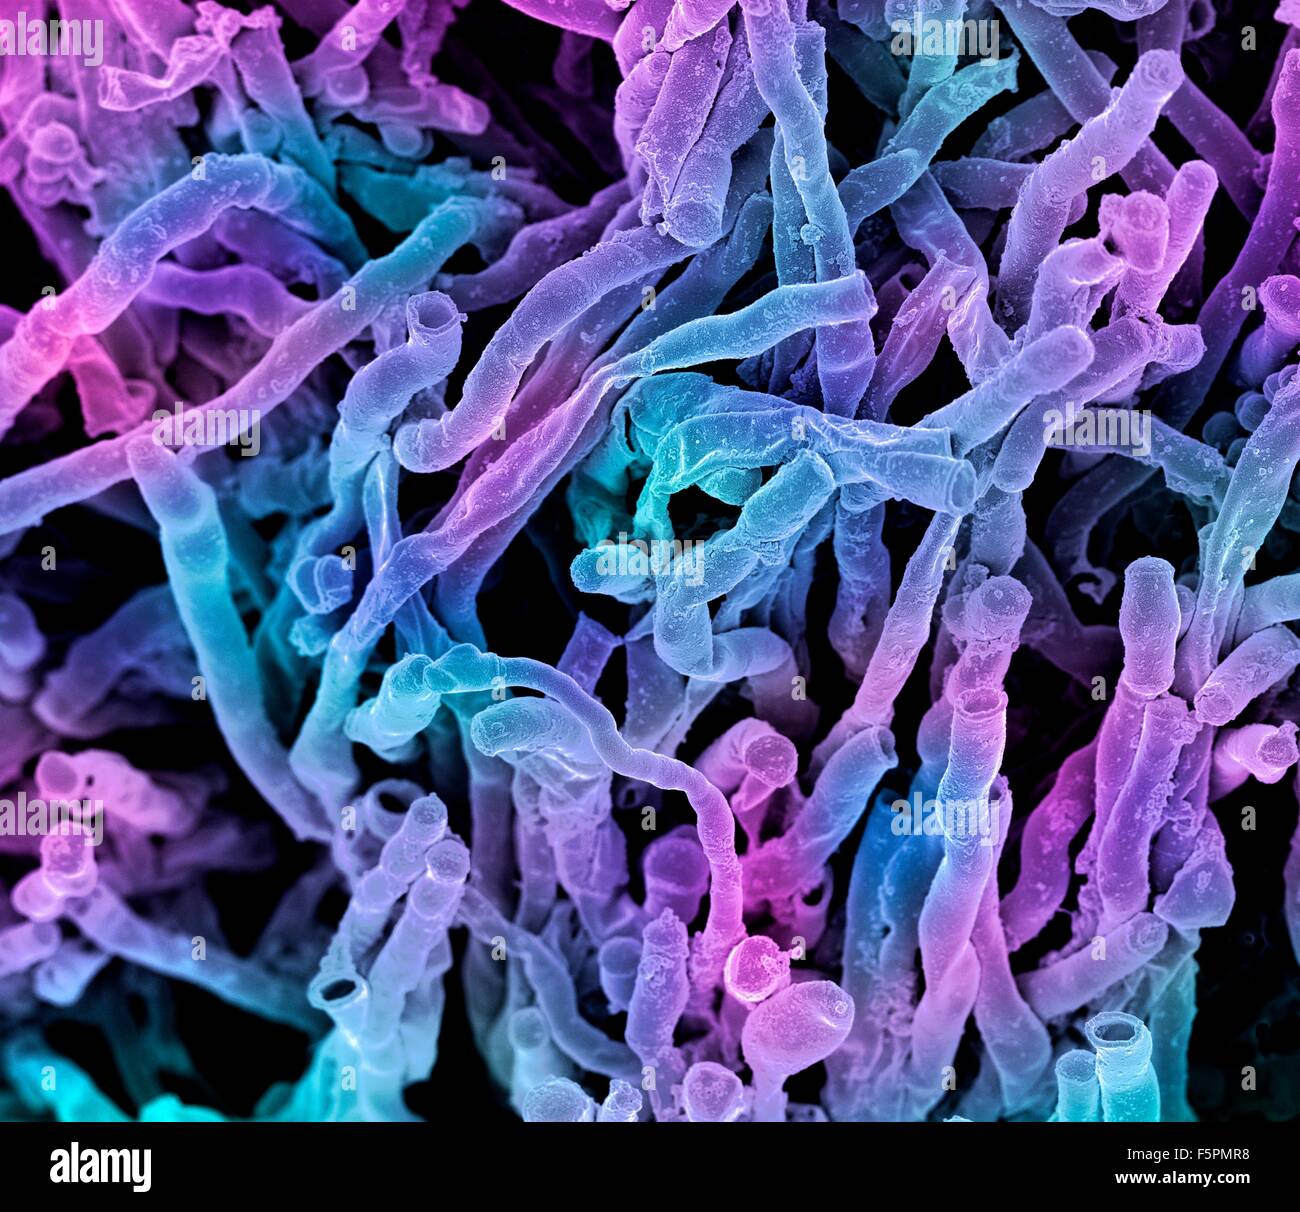 Actinomyces viscosus bacteria. Coloured scanning electron micrograph (SEM) of strands of Actinomyces viscosus. Actinomyces Stock Photo